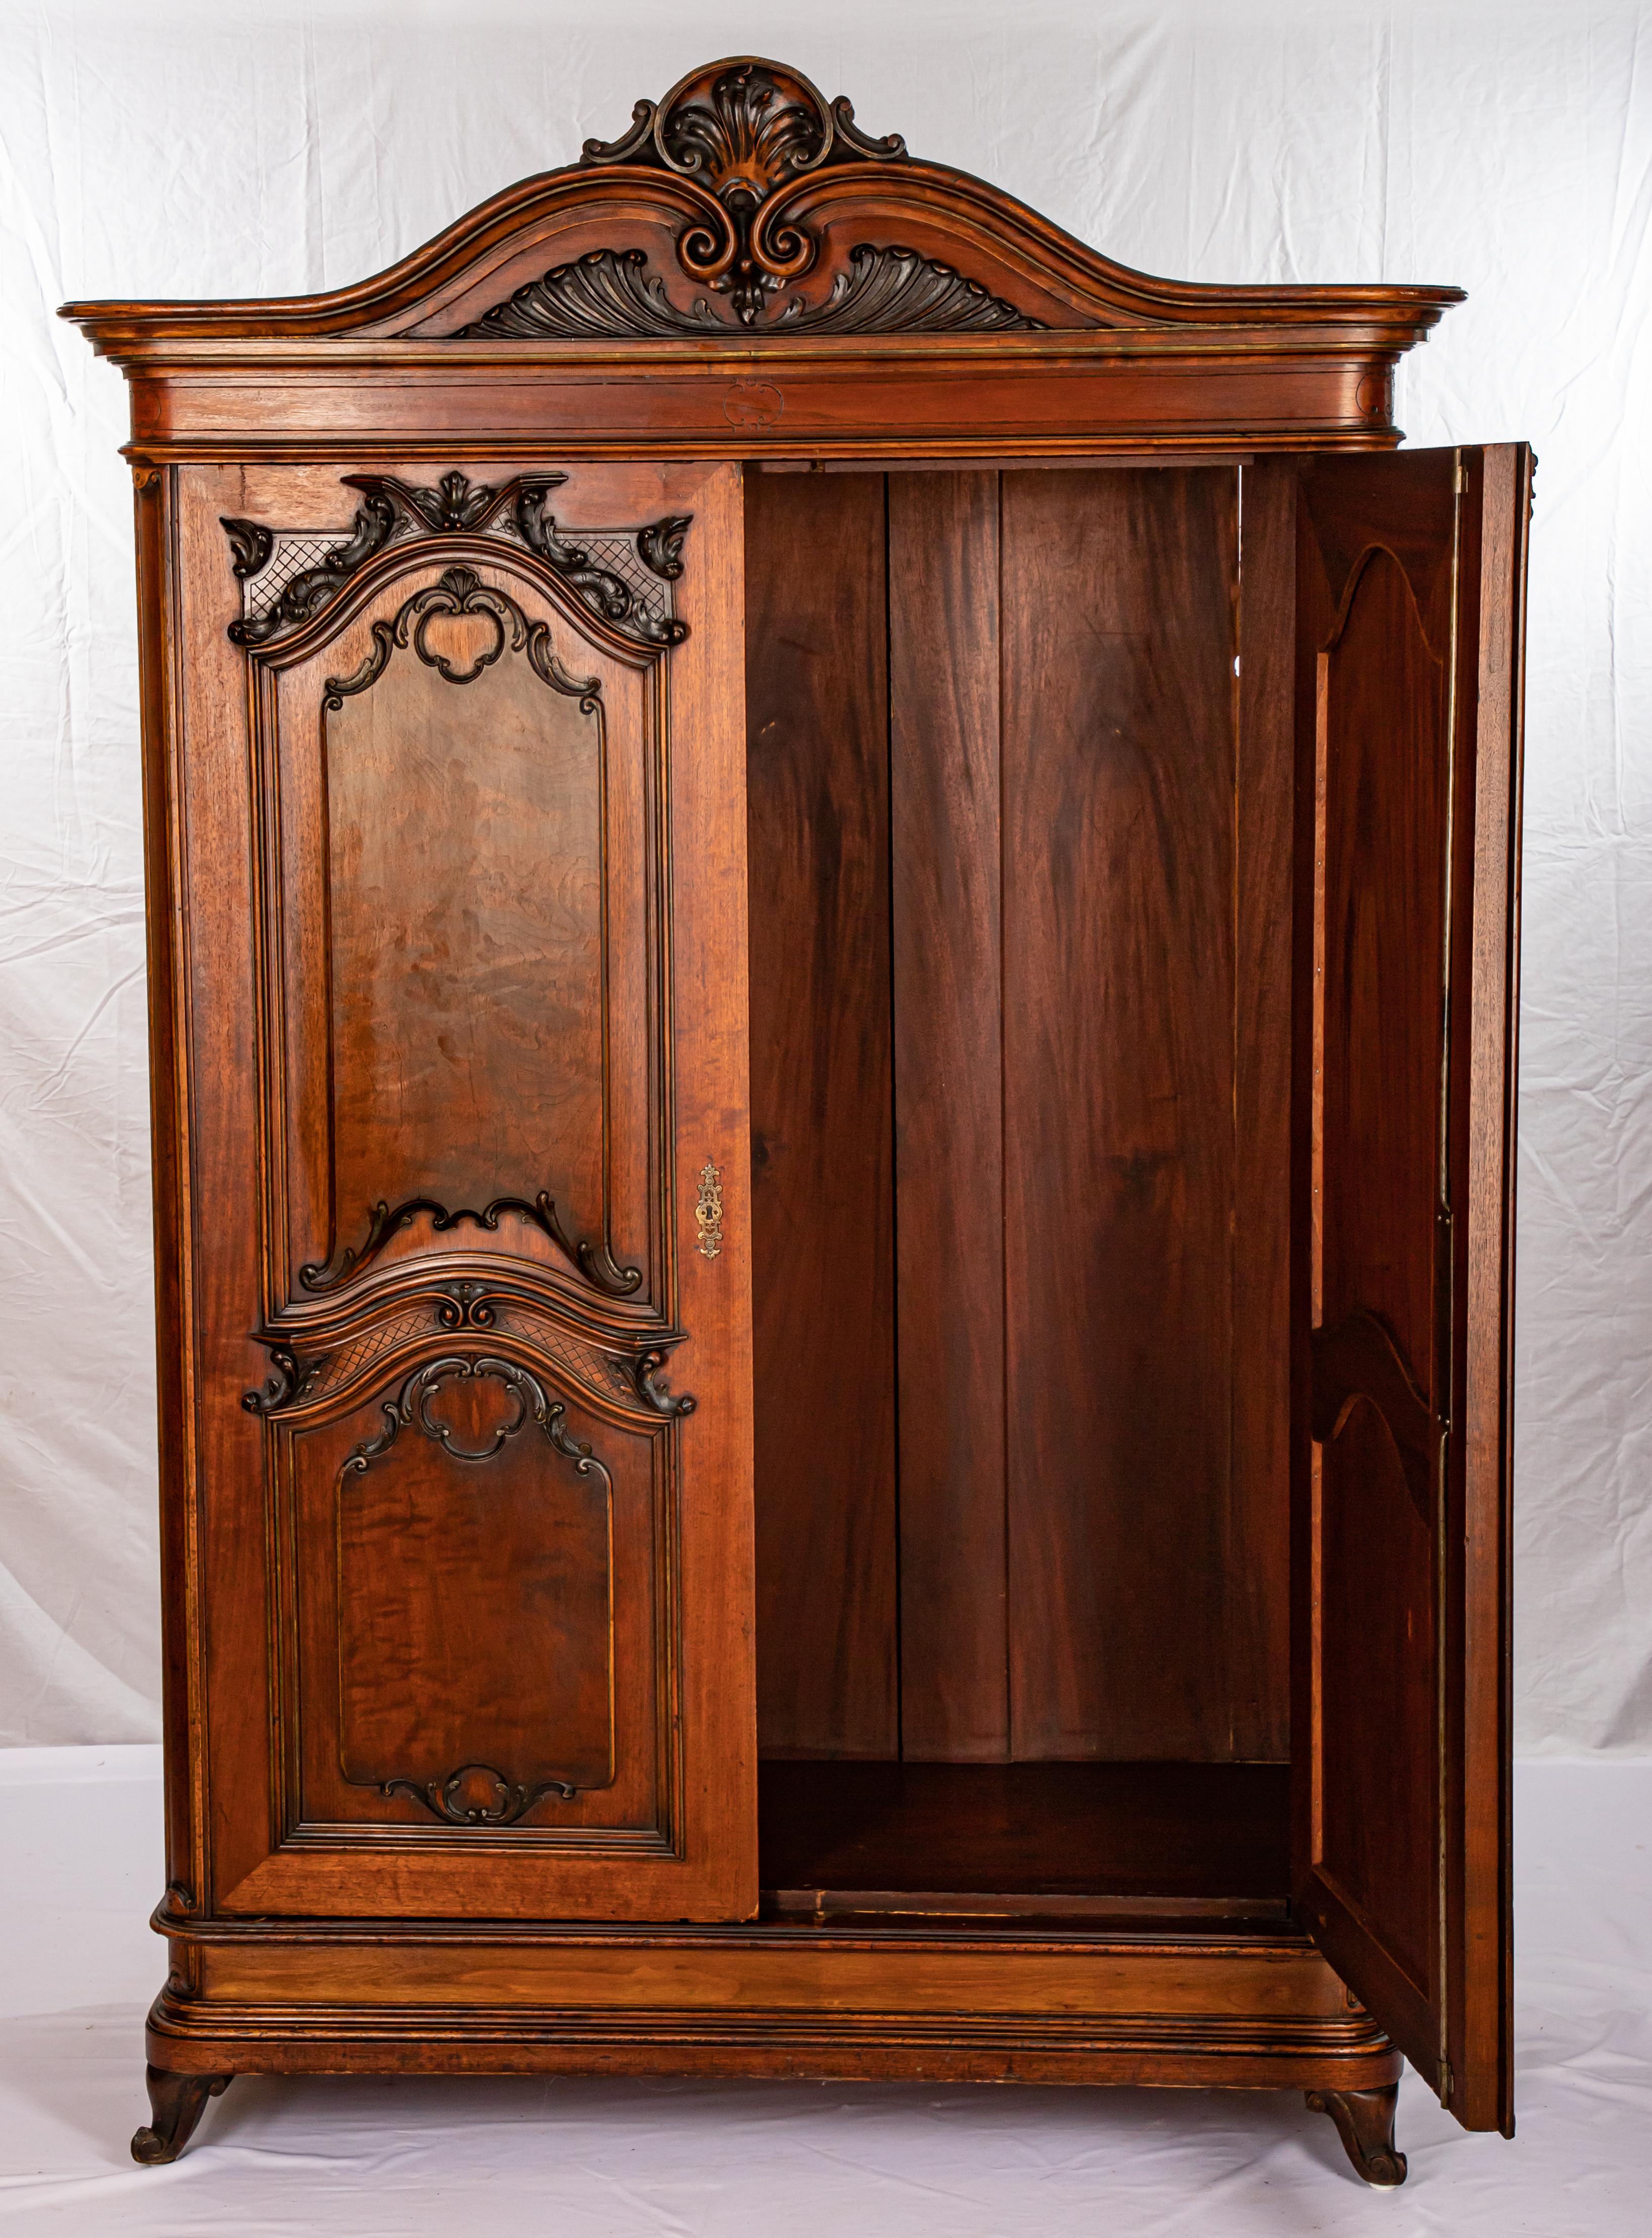 Offering this magnificent Italian 2-door armoire. This armoire features gorgeous walnut wood that has been handcrafted and hand carved. This piece starts on the bottom on snail legs. Rising from there the beautiful hand carved doors are the next